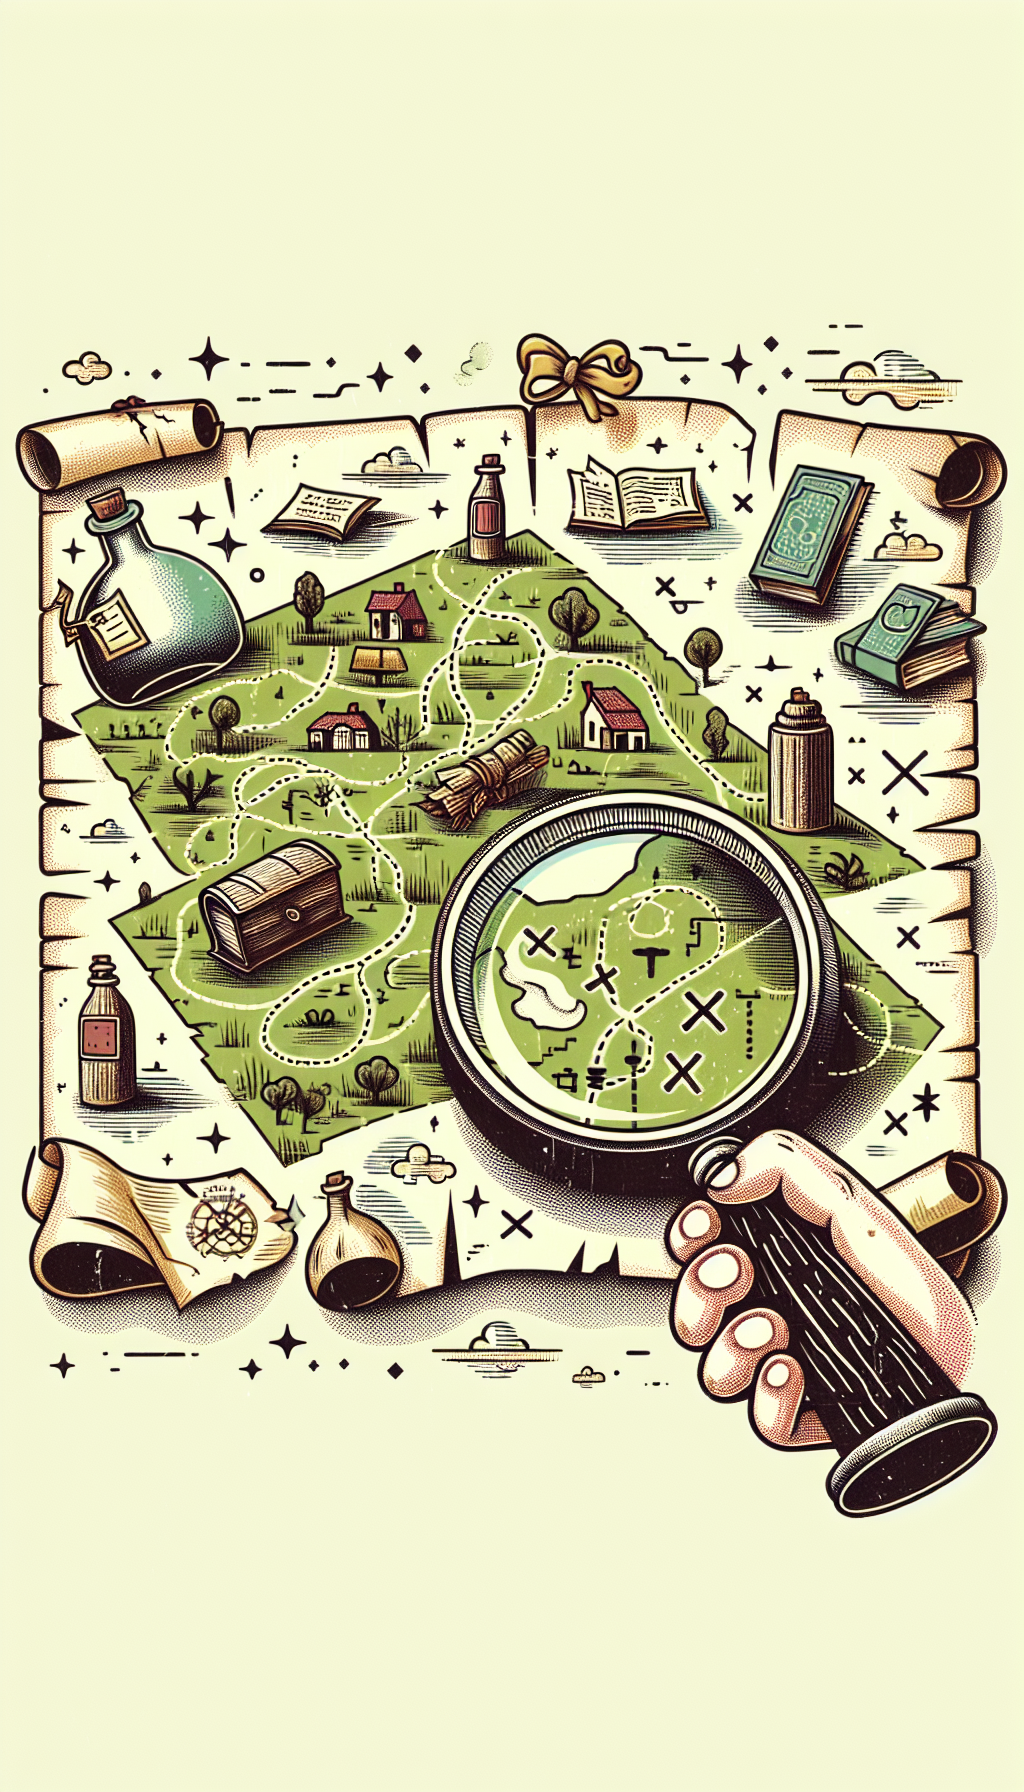 A whimsical illustration features a vintage treasure map unfurling across the page, with X marks spotlighting various terrains like attics, flea markets, and old farmhouses. An antique bottle magnifying glass hovers above, revealing intricate details and secrets of the bottles’ pasts, their labels transforming into miniature storybooks and time-worn scrolls that hint at their histories.